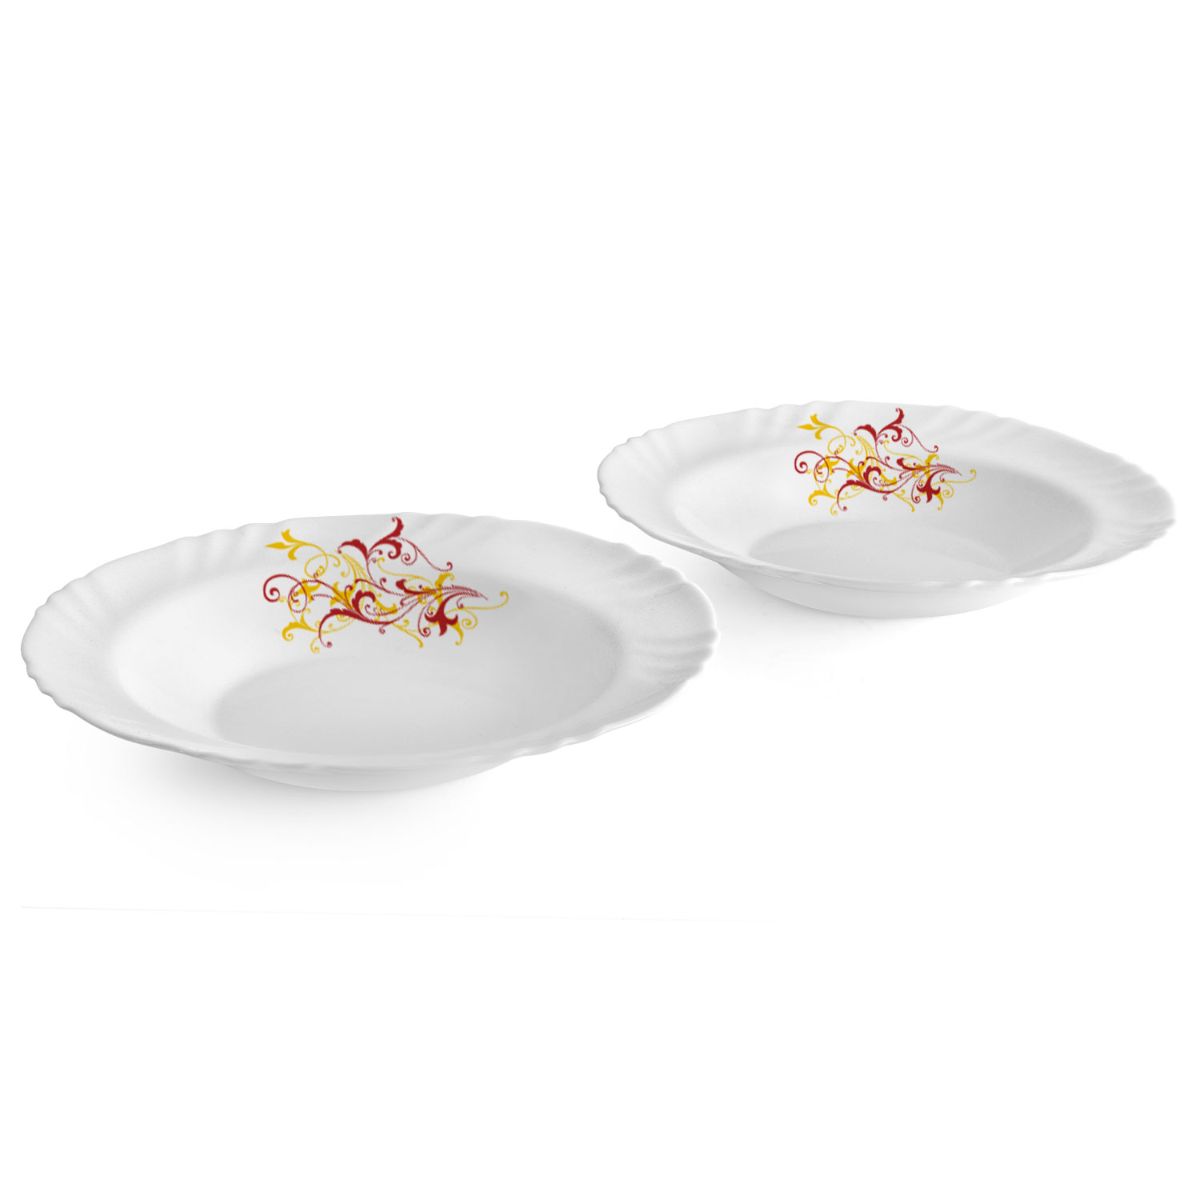 Dazzle Series Pasta Gift Set, 2 Pieces Yellow Scroll / 2 Pieces